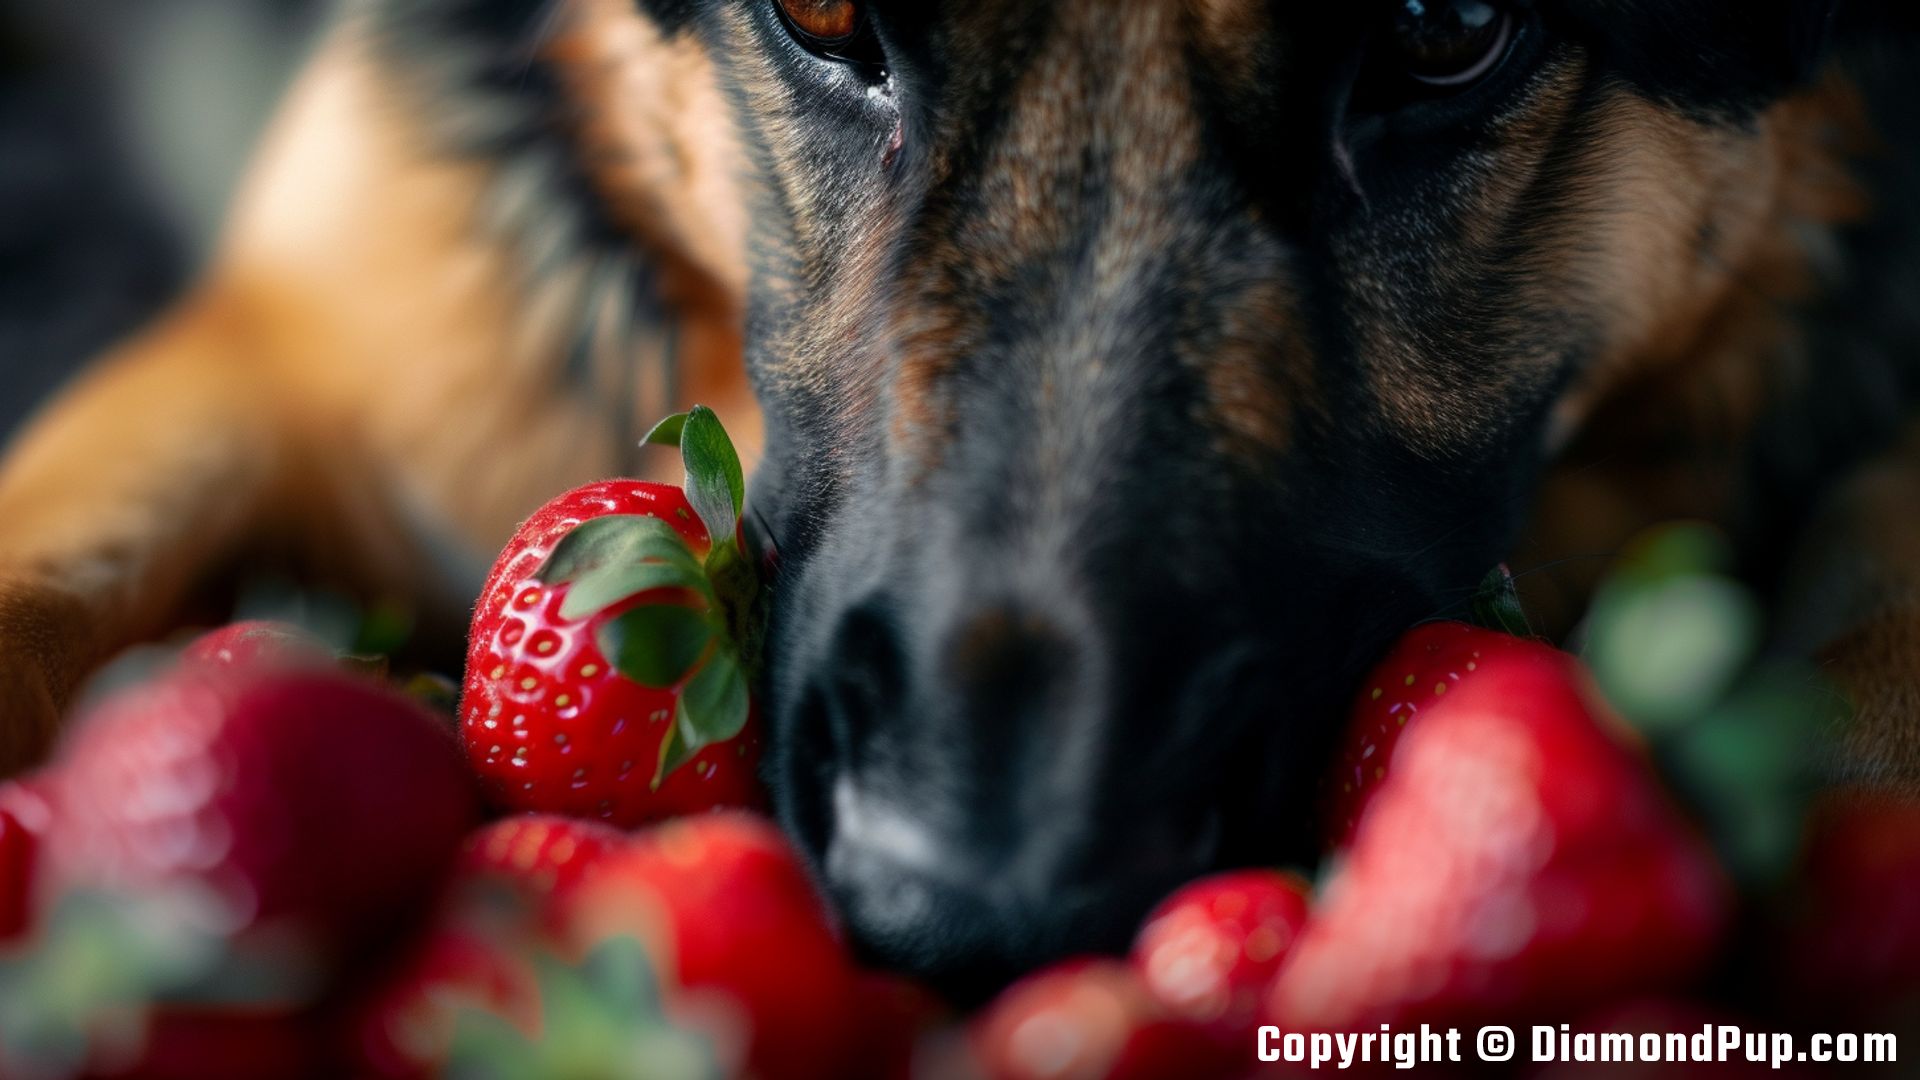 Photograph of a Playful German Shepherd Snacking on Strawberries